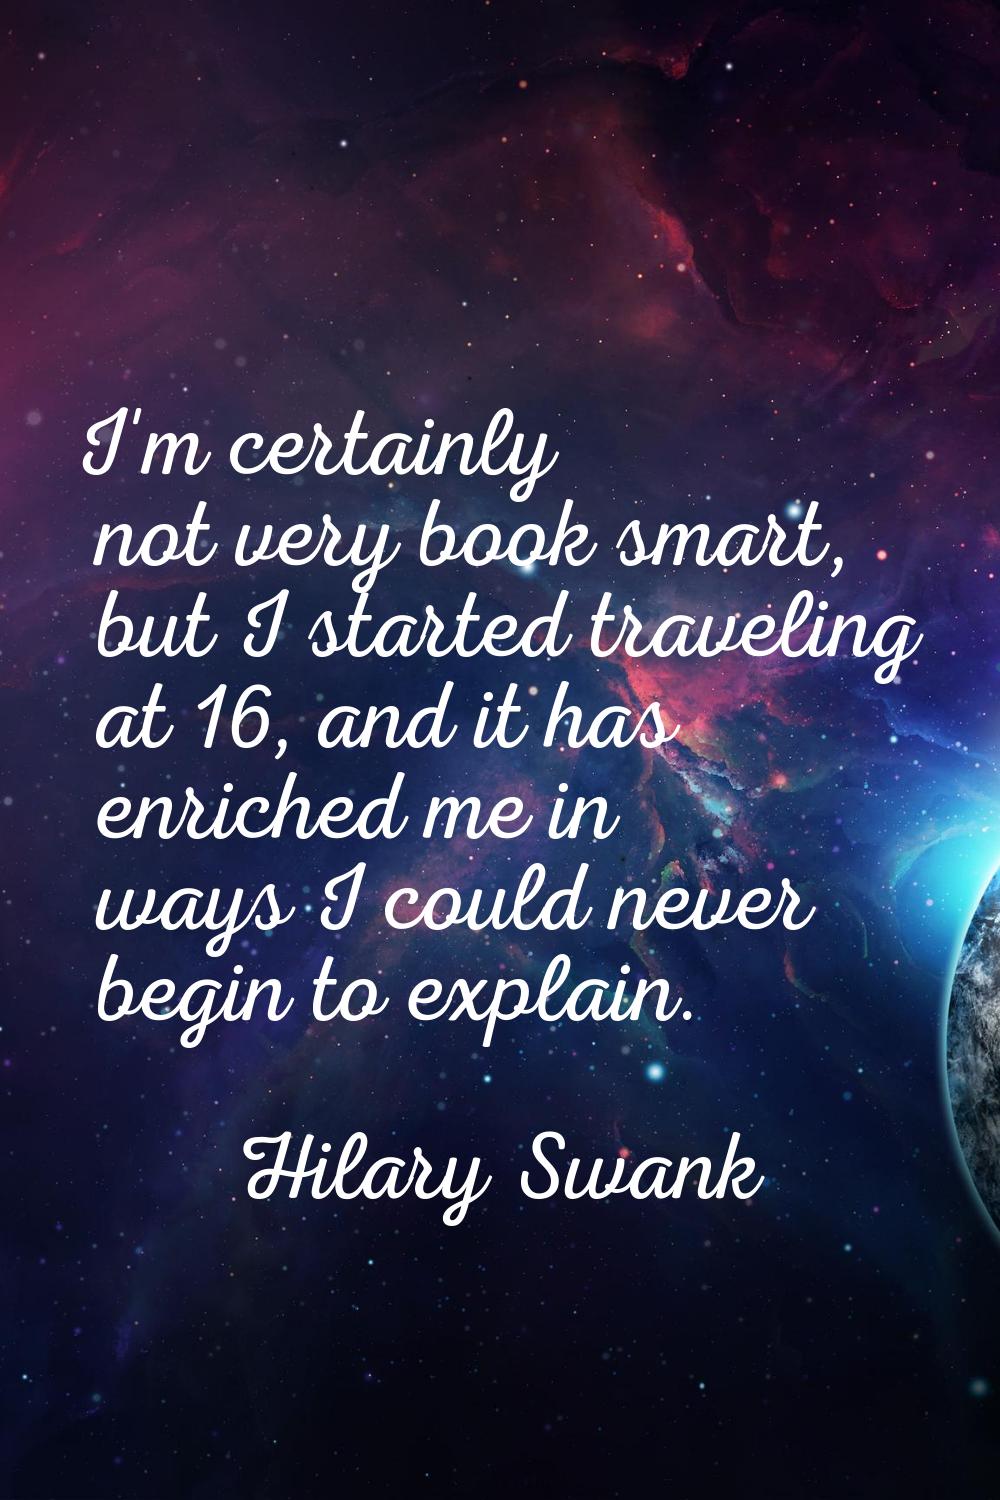 I'm certainly not very book smart, but I started traveling at 16, and it has enriched me in ways I 